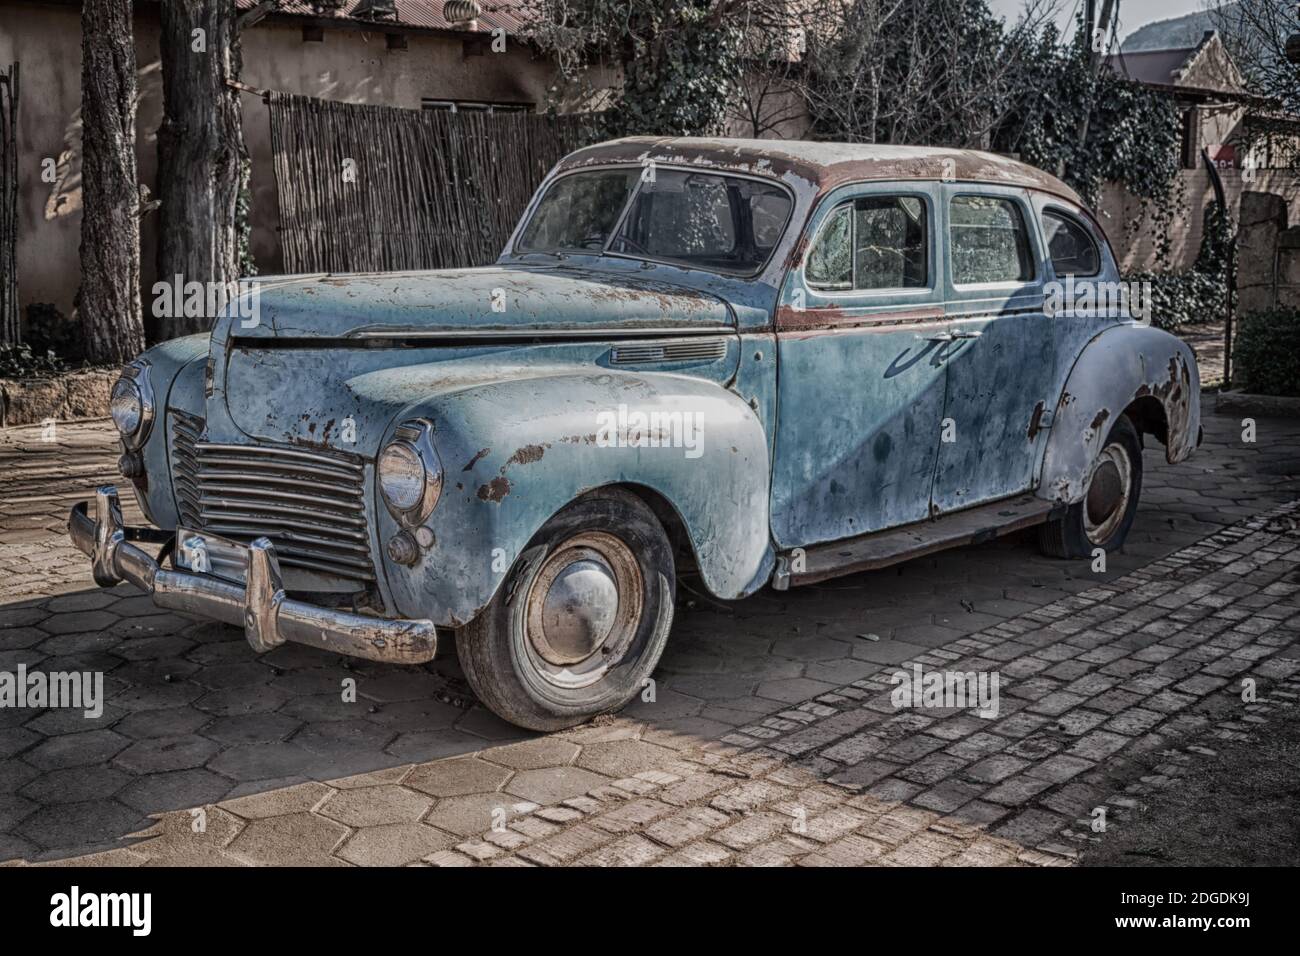 In south africa old abandoned   vintage car Stock Photo